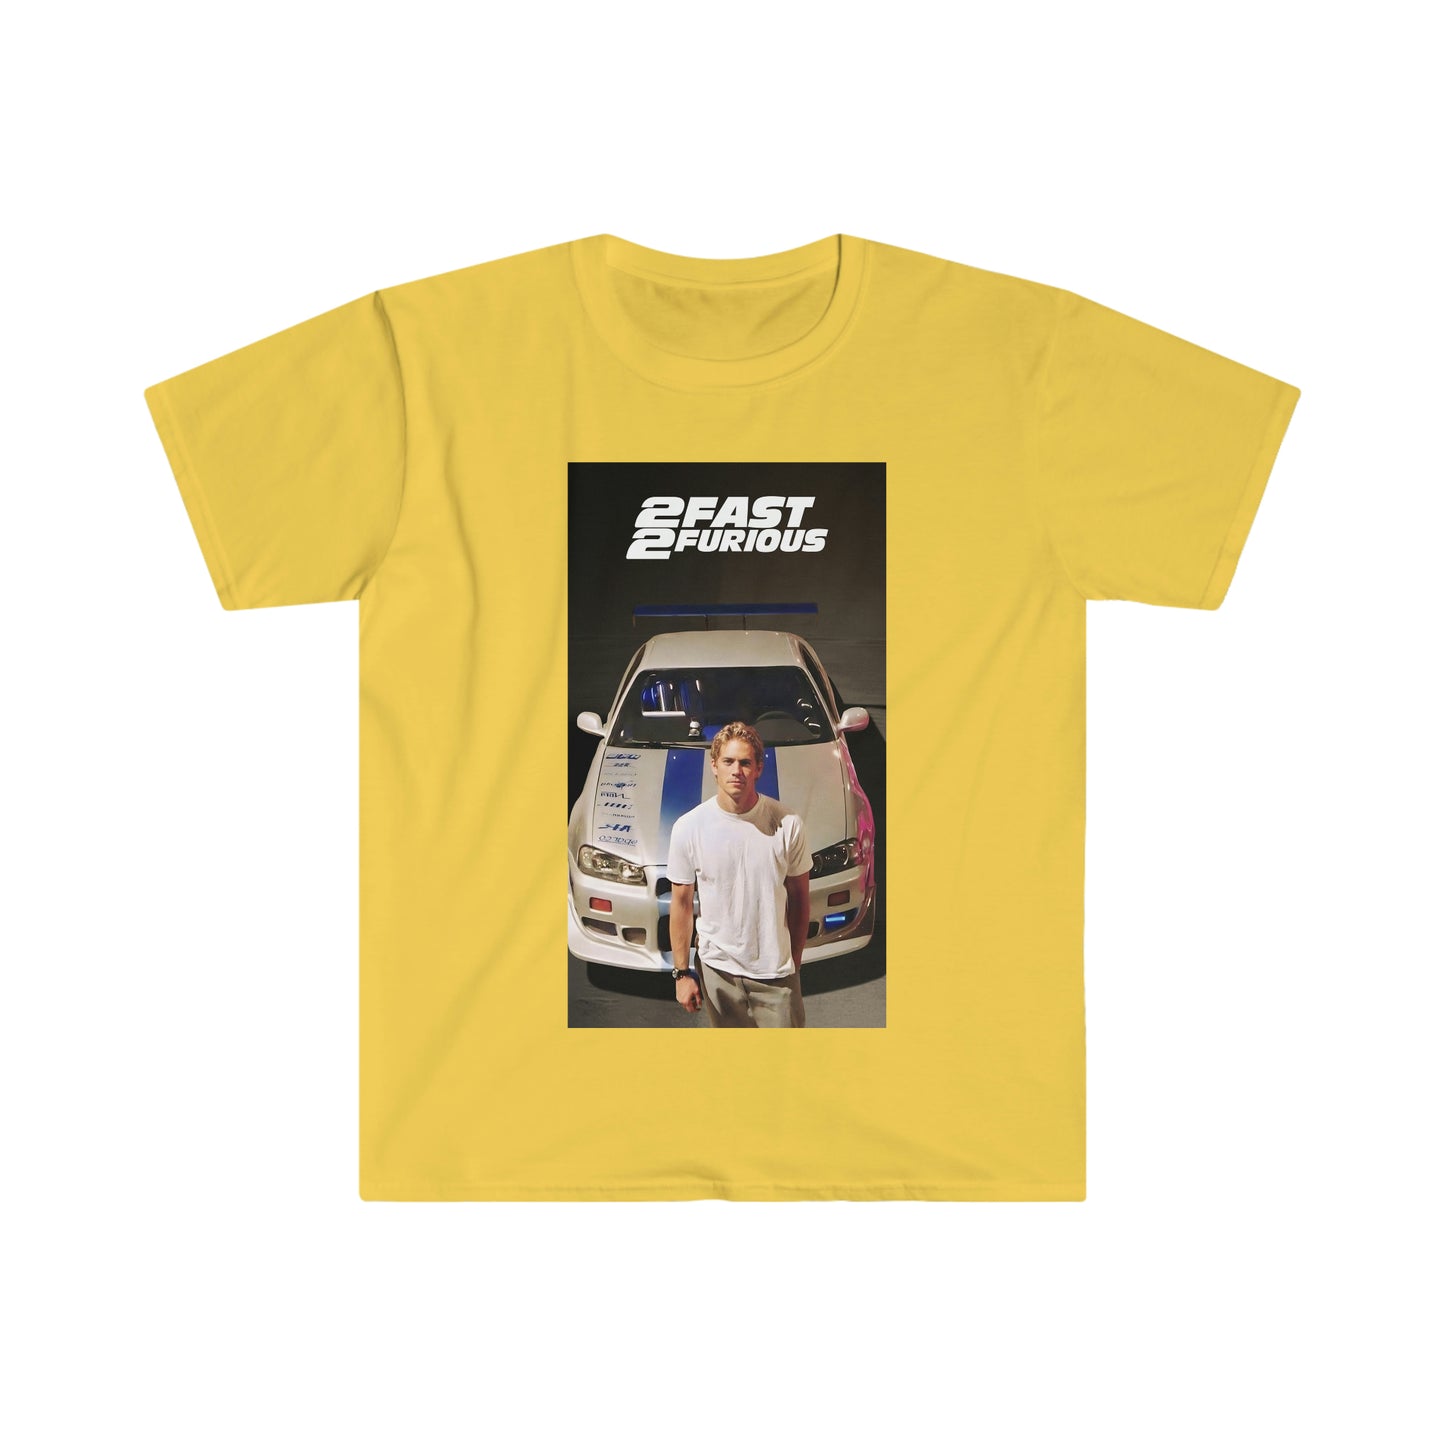 T-Shirt aka Pump Cover | 2 Fast 2 Furious (with title) - Paul Walker / Fast and the Furious